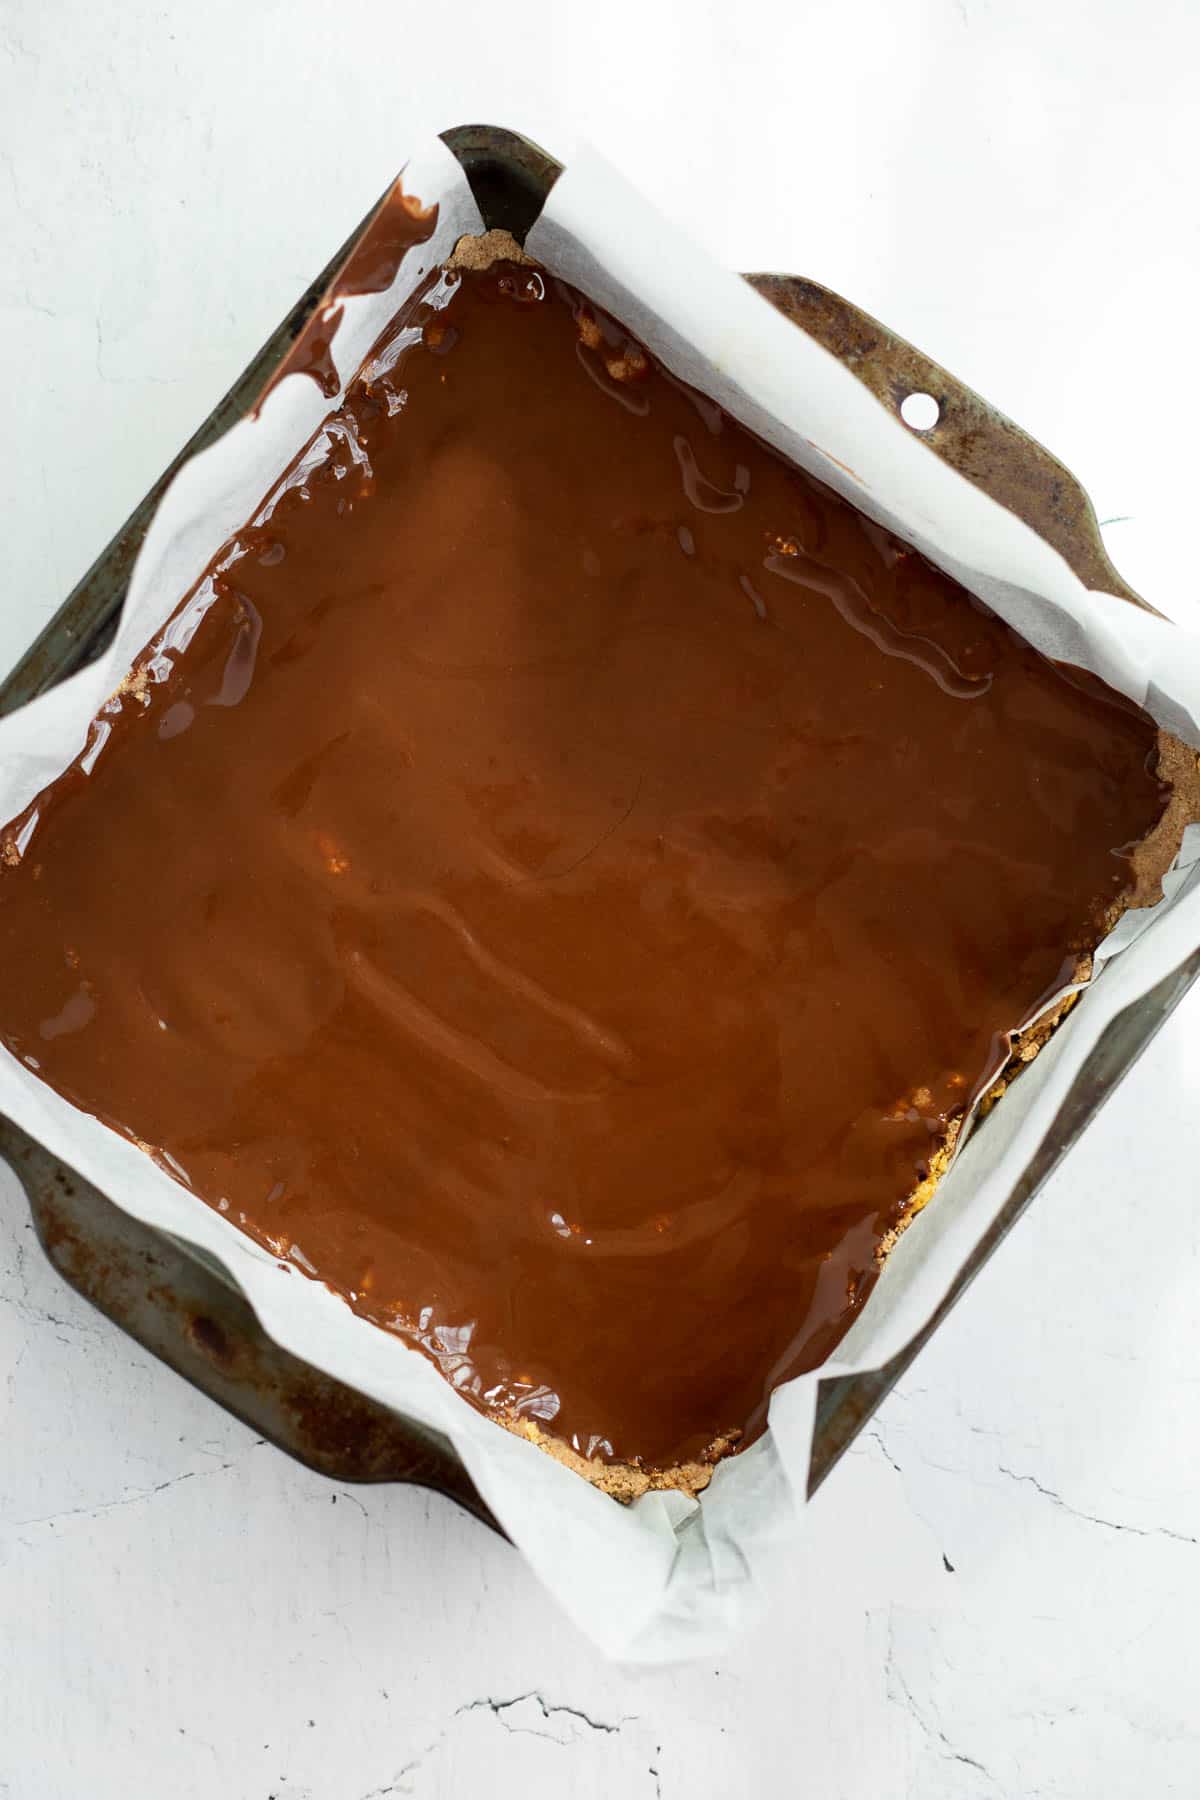 melted chocolate spread on energy bars in baking dish.